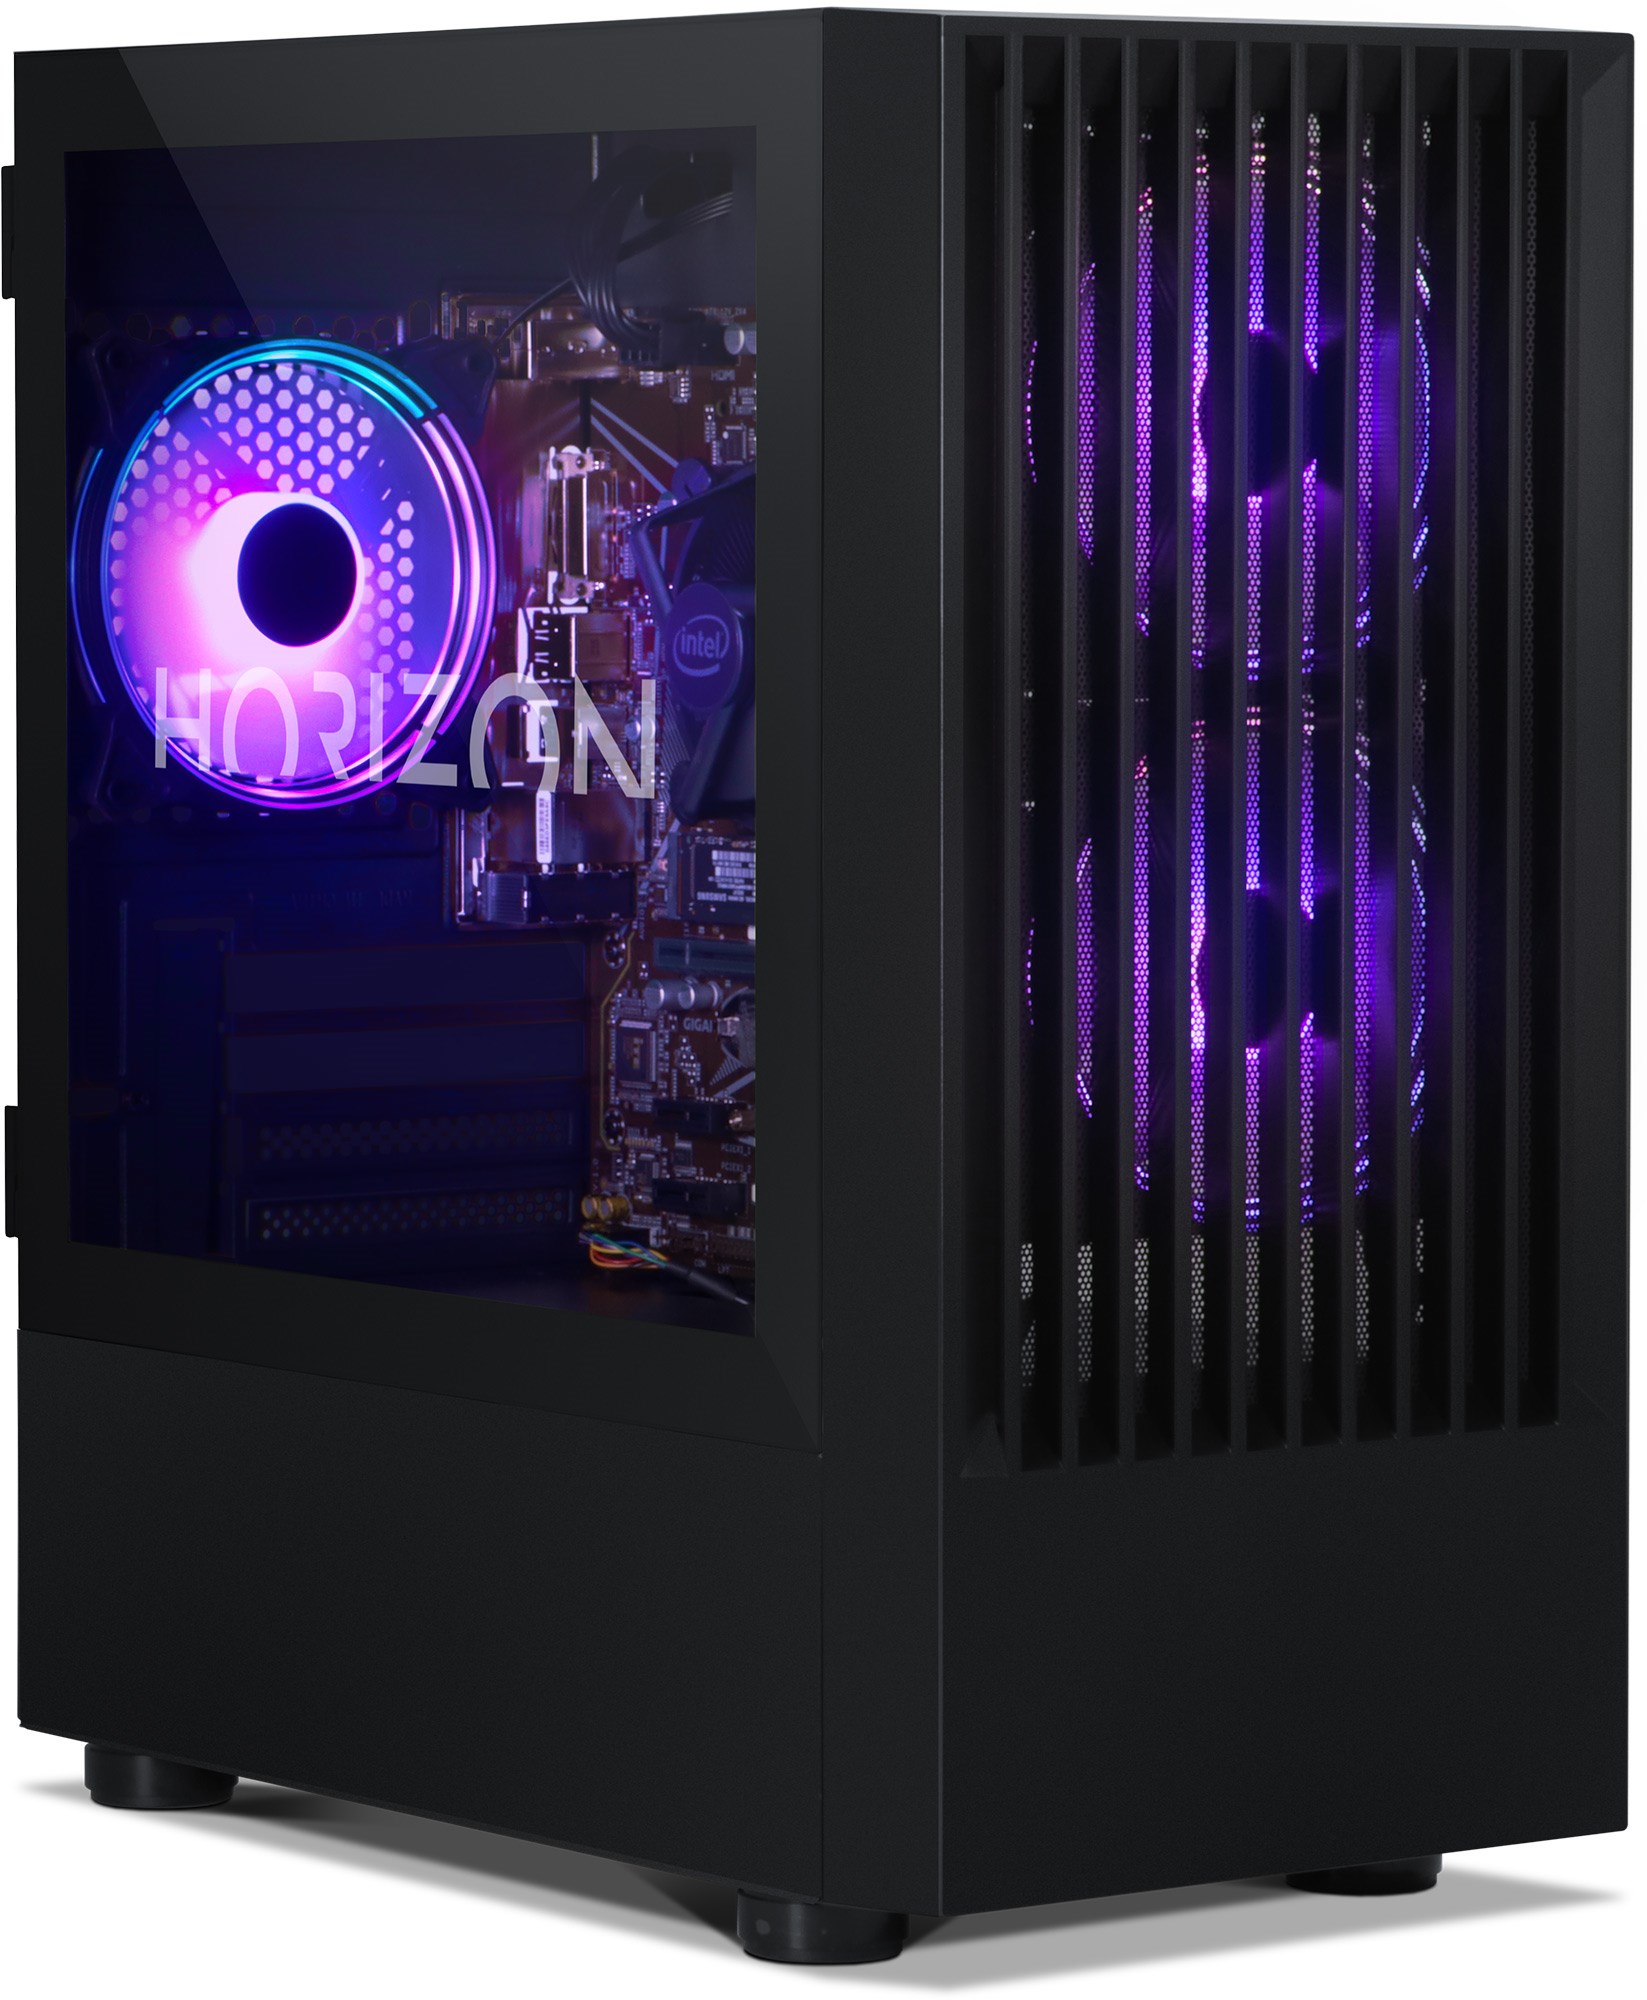 View of front and left side of a Horzion Noir i3 RX 6600 Gaming PC